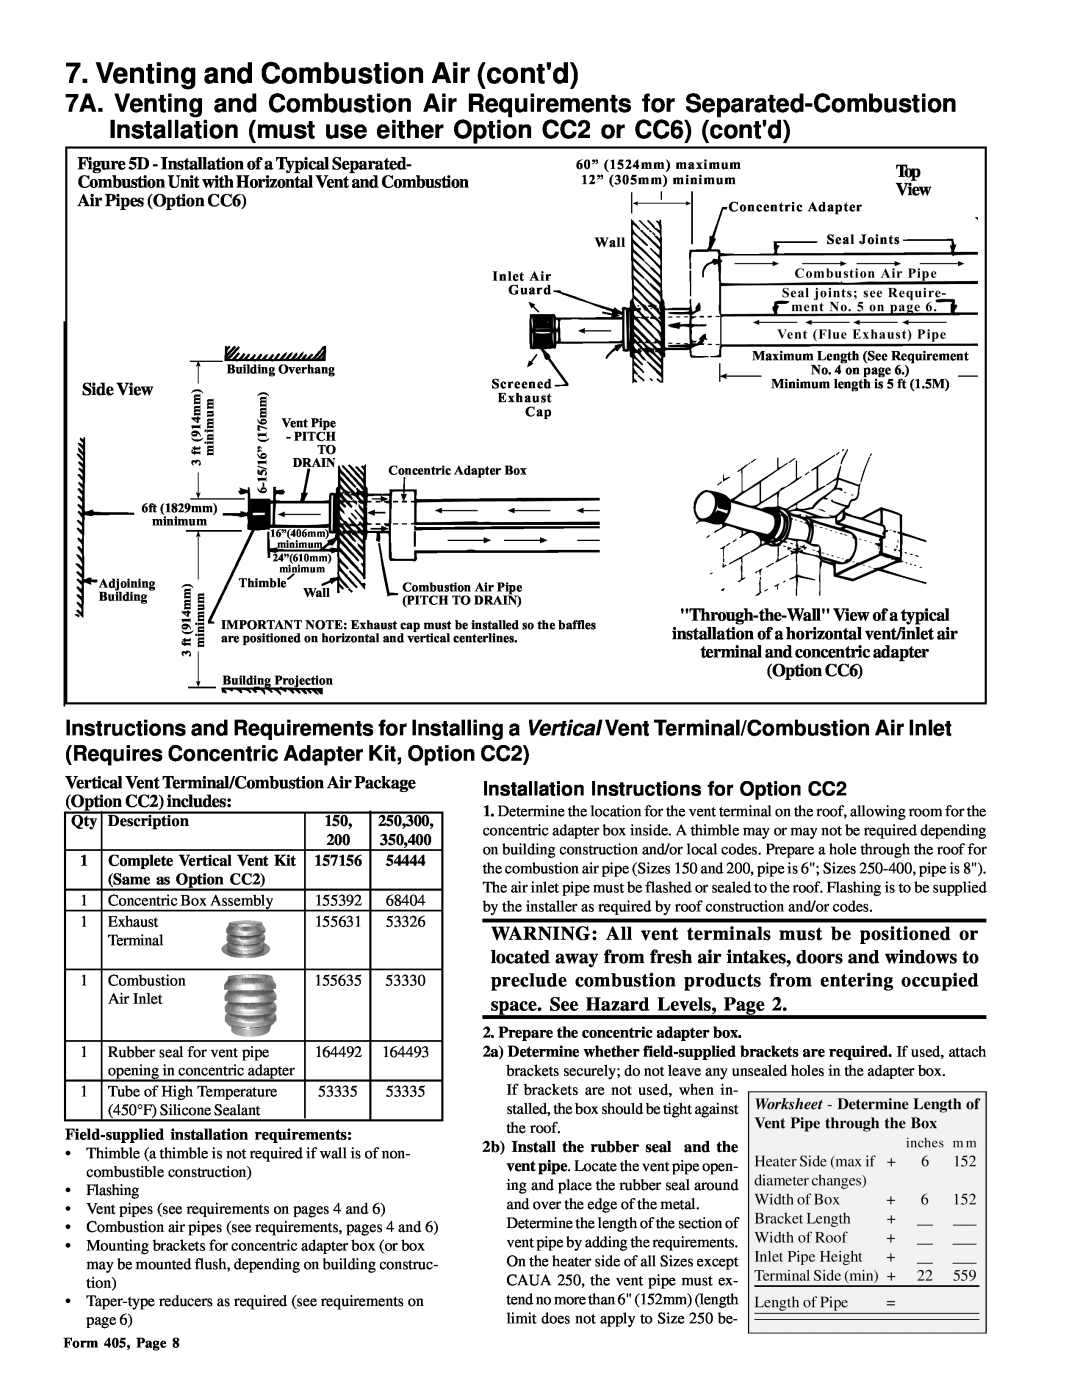 Thomas & Betts RGM 405, RZ405 dimensions Venting and Combustion Air contd, Installation Instructions for Option CC2 